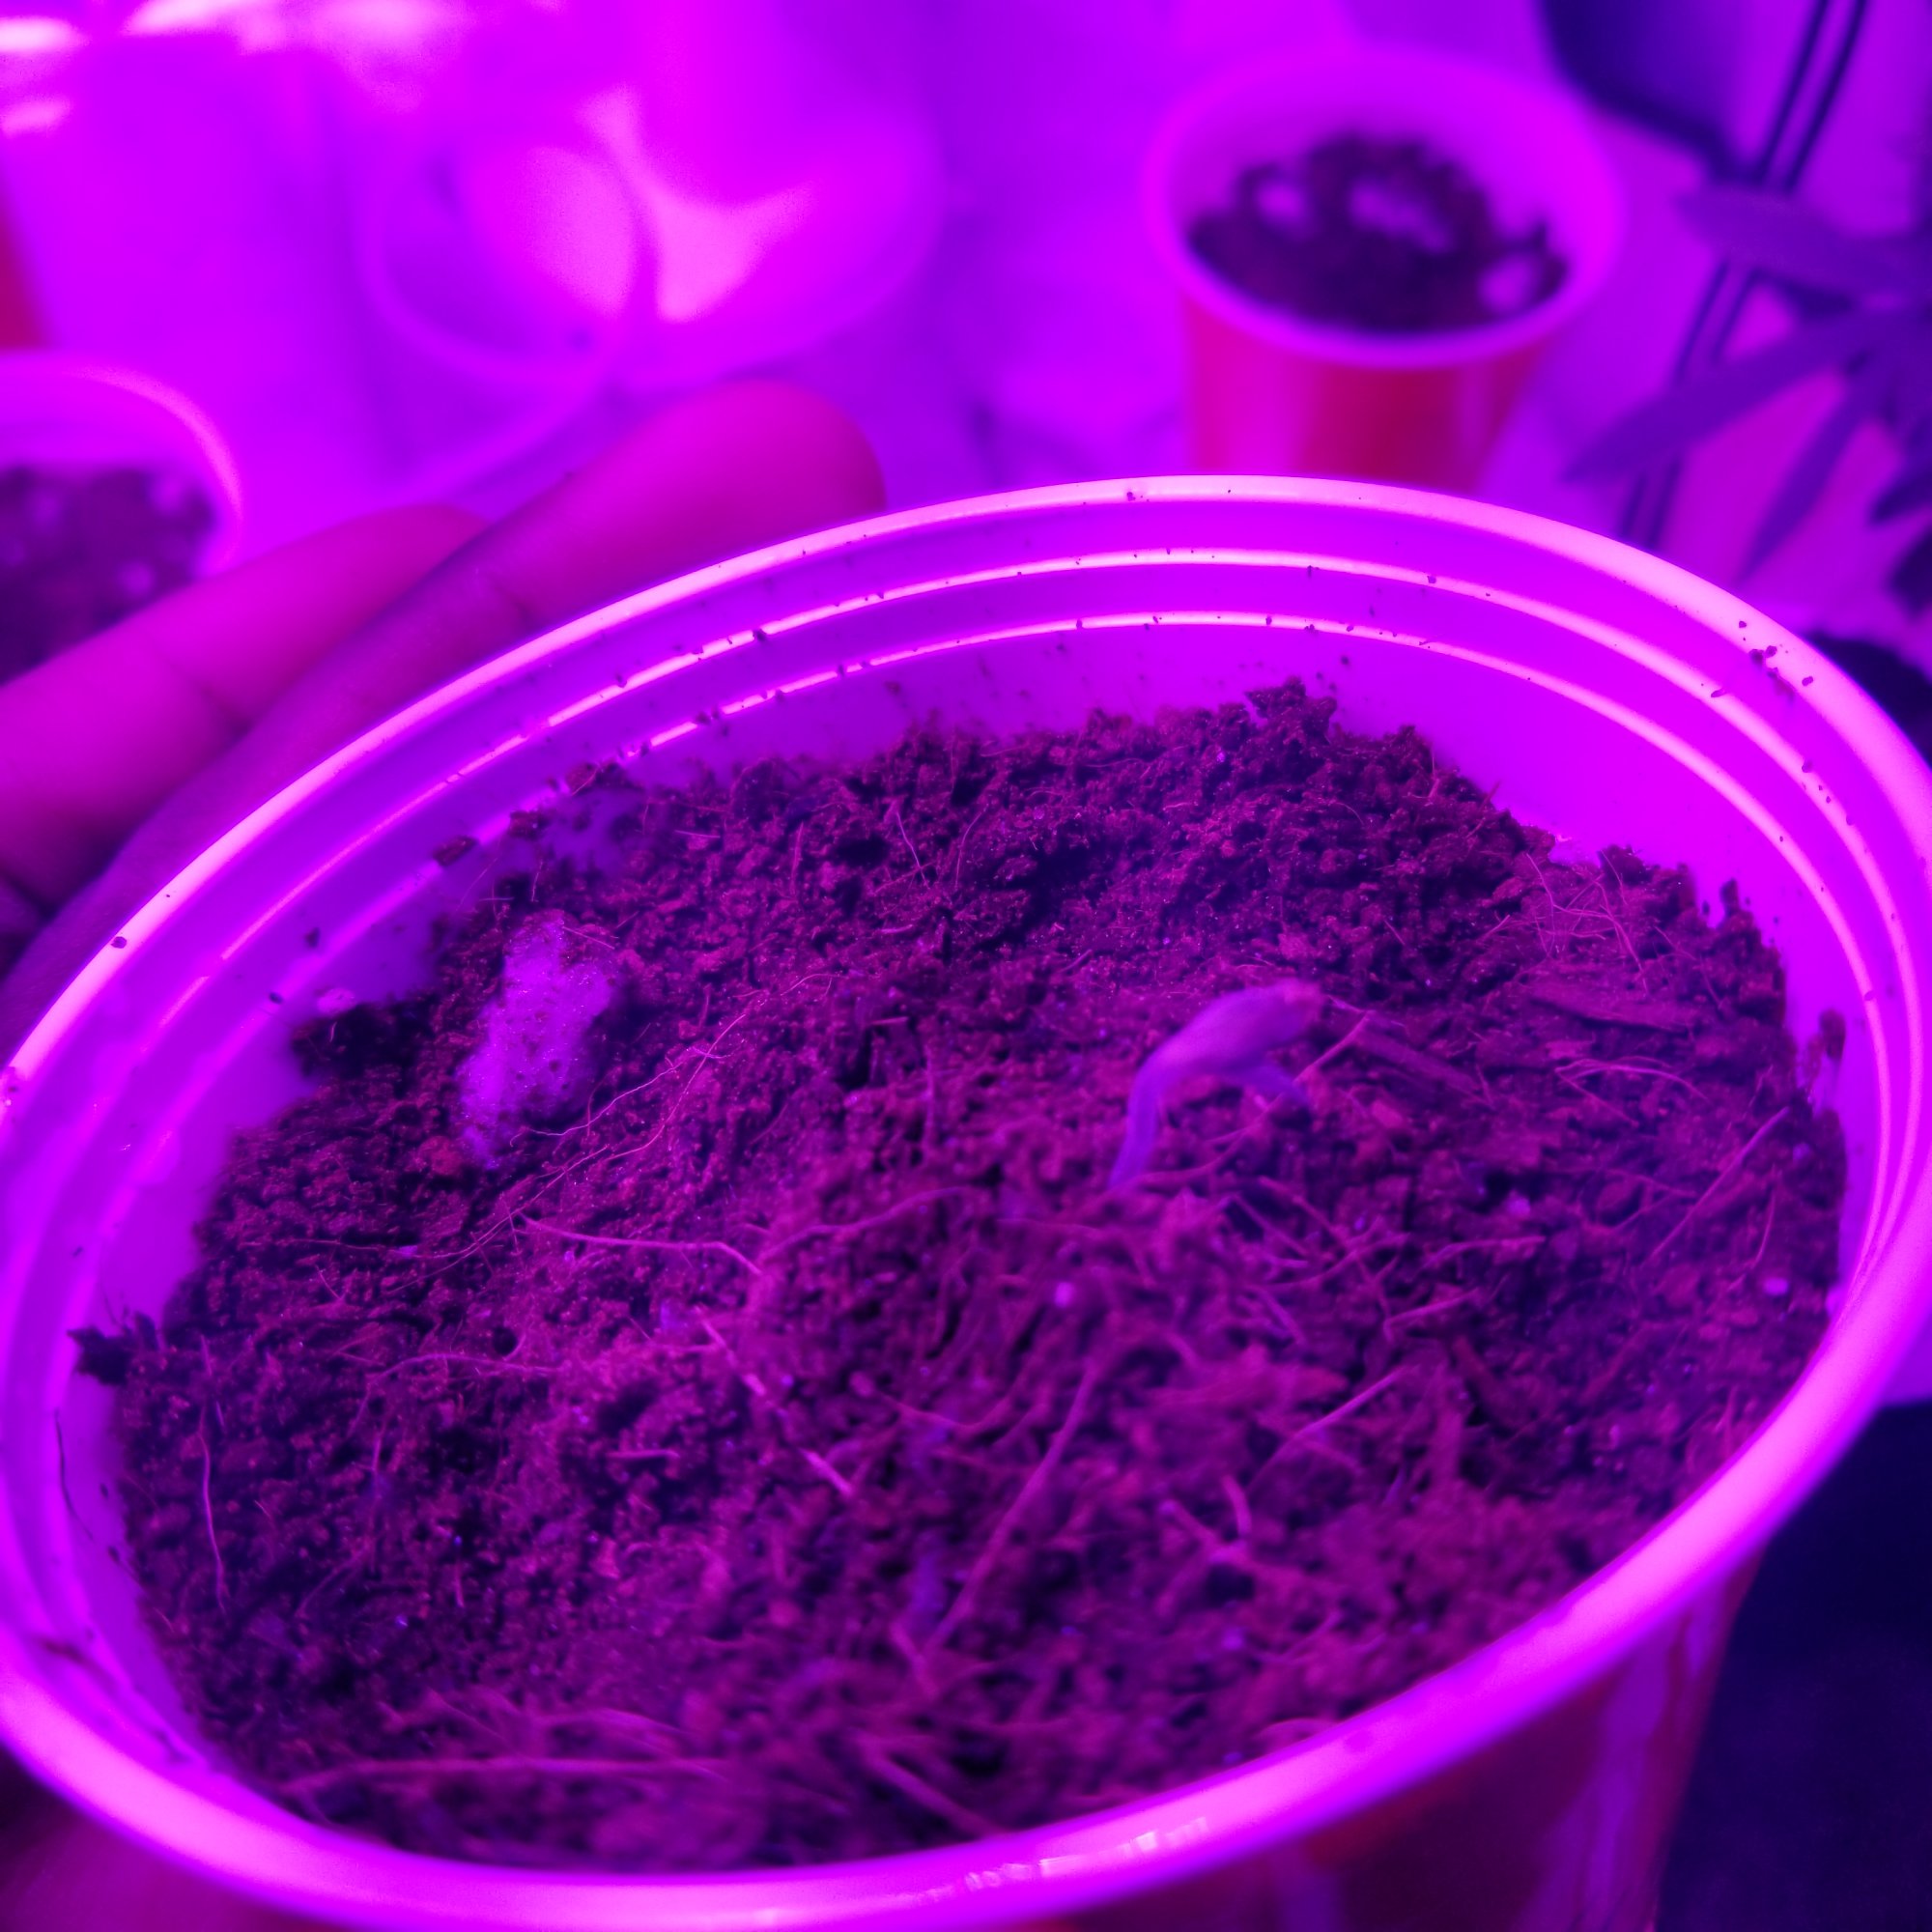 Please help my seedlings are dying 3